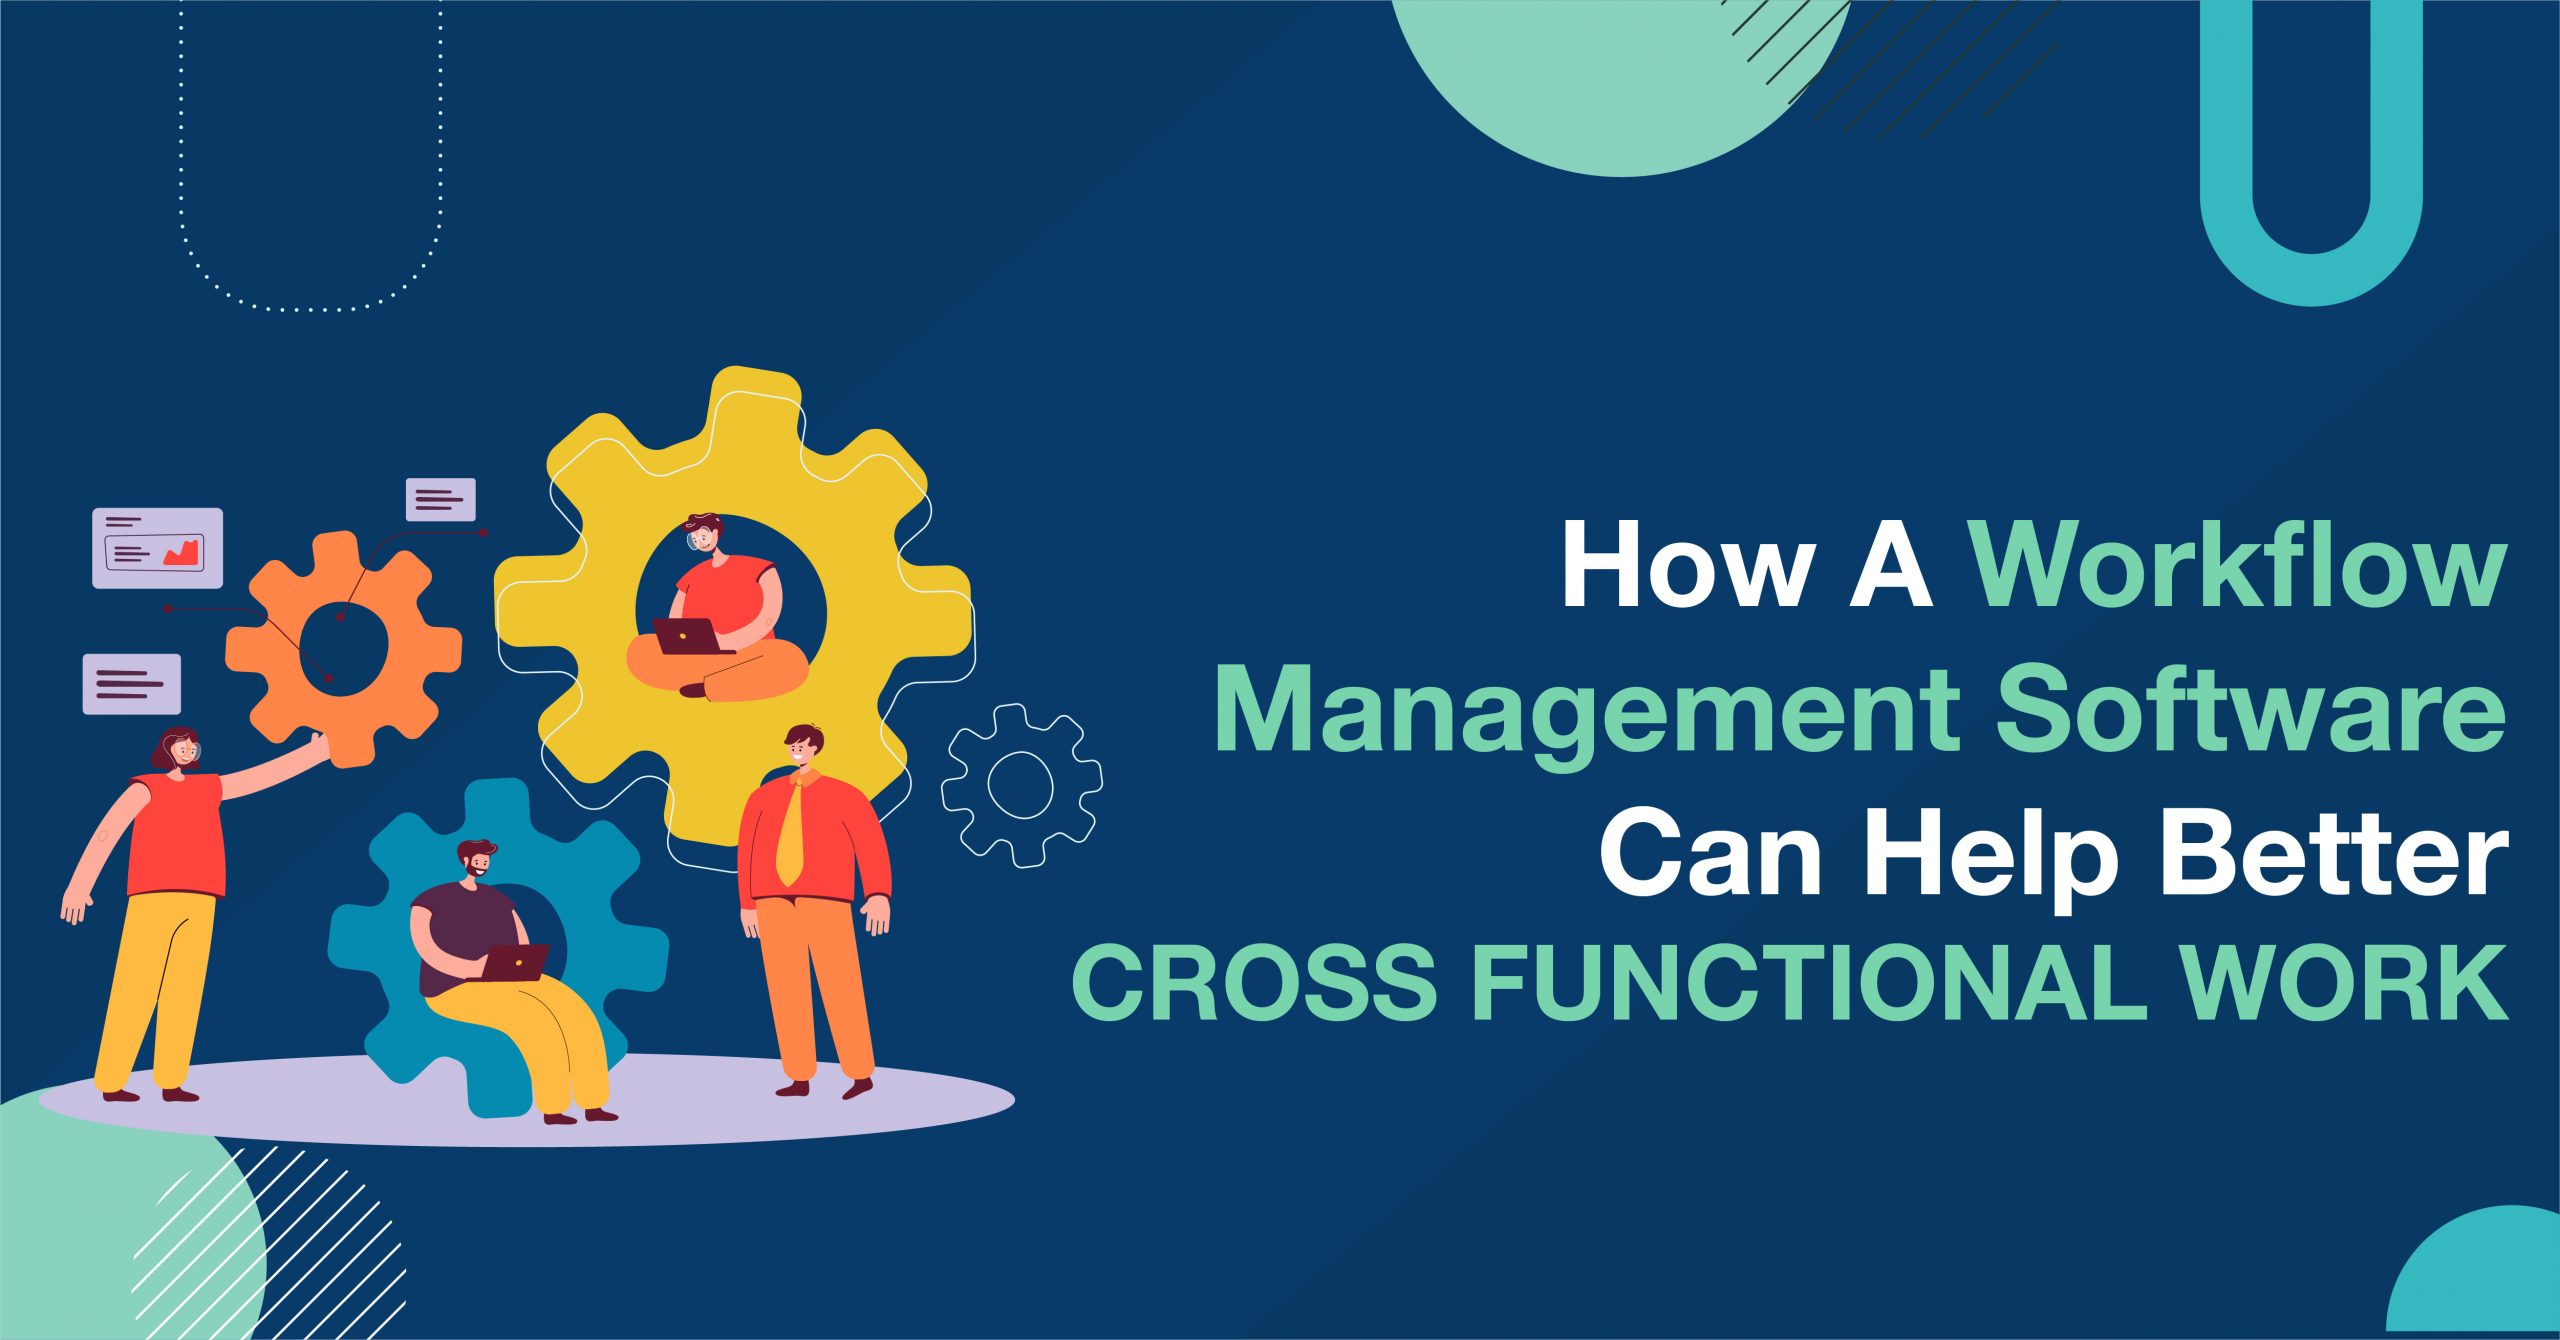 How A Workflow Management Software can help Better Cross Functional work